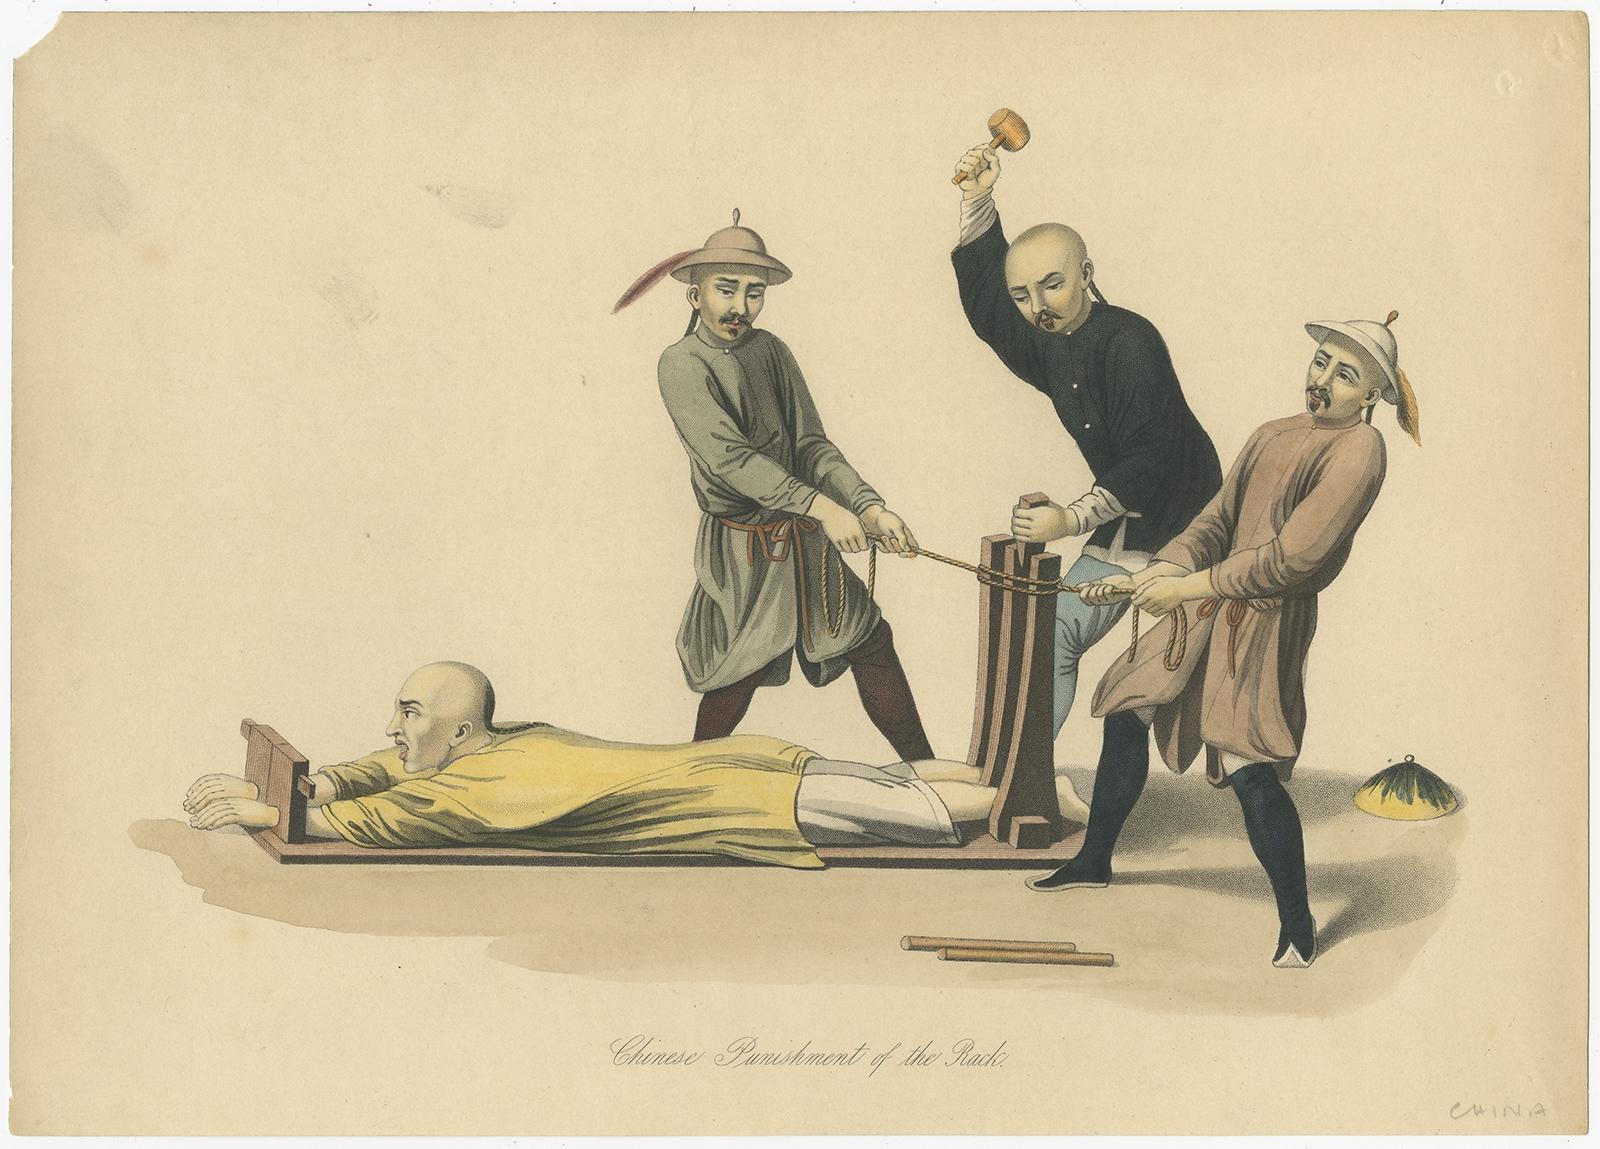 Antique print titled 'Chinese Punishment of the Rack'. Print of Chinese punishment of the rack. The rack is a torture device consisting of a rectangular, usually wooden frame. This print originates from 'The Chinese Empire: historical and